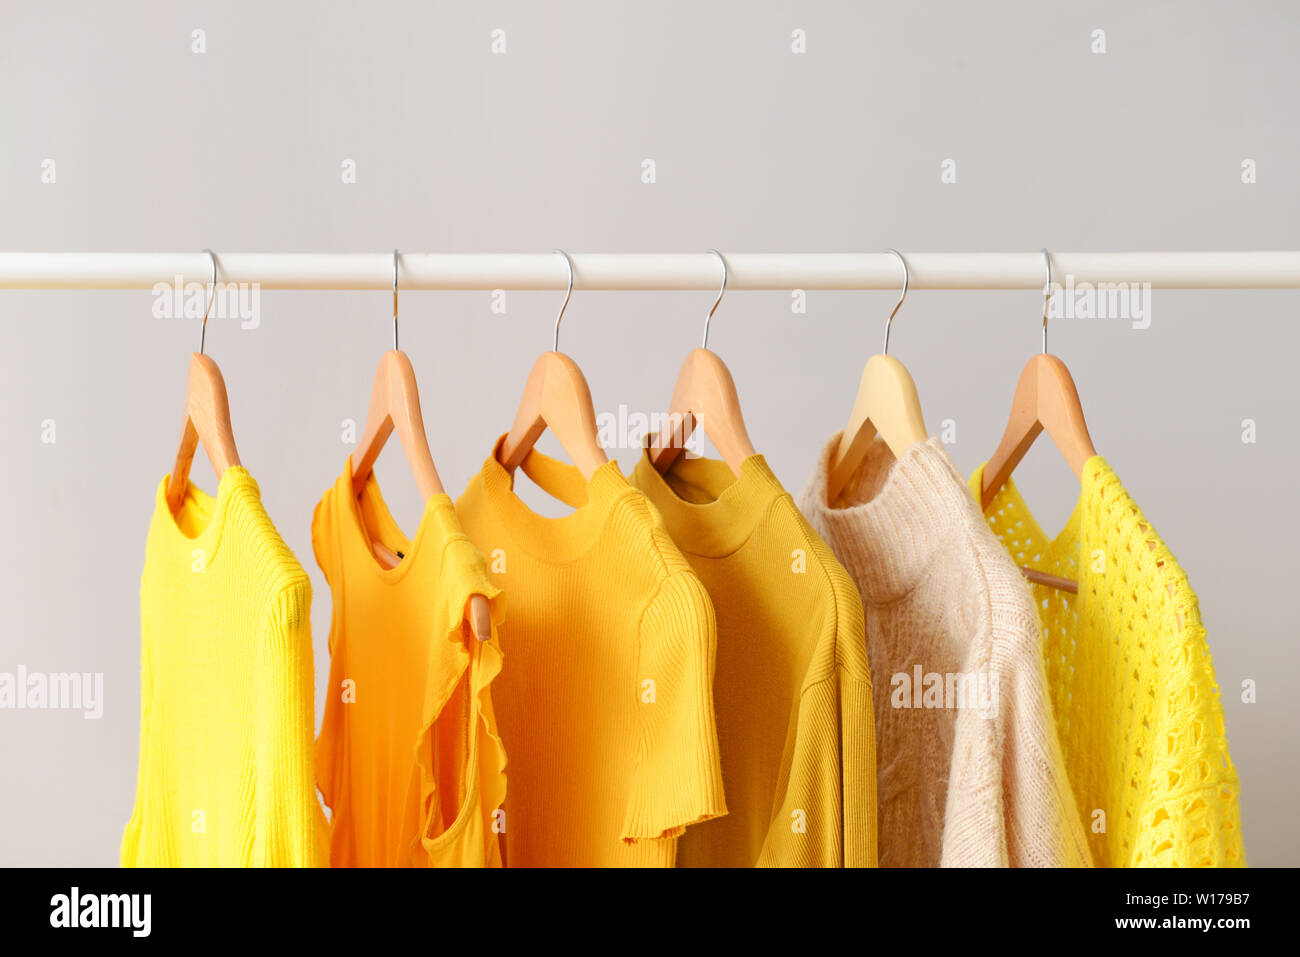 https://c8.alamy.com/comp/W179B7/rack-with-clothes-after-dry-cleaning-on-light-background-W179B7.jpg